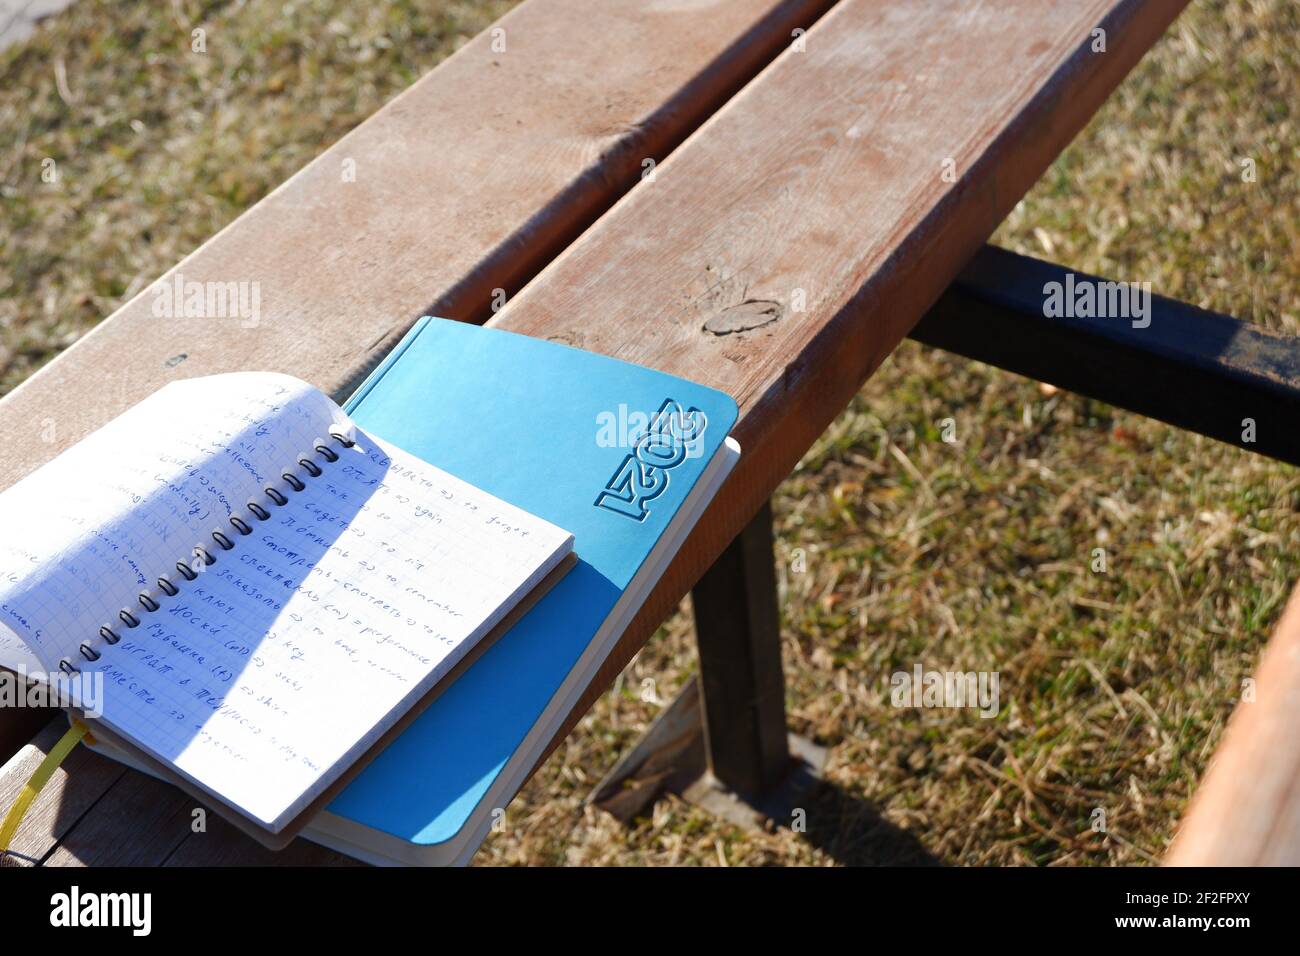 Opened notebook and Agenda on Wooden Bench Stock Photo